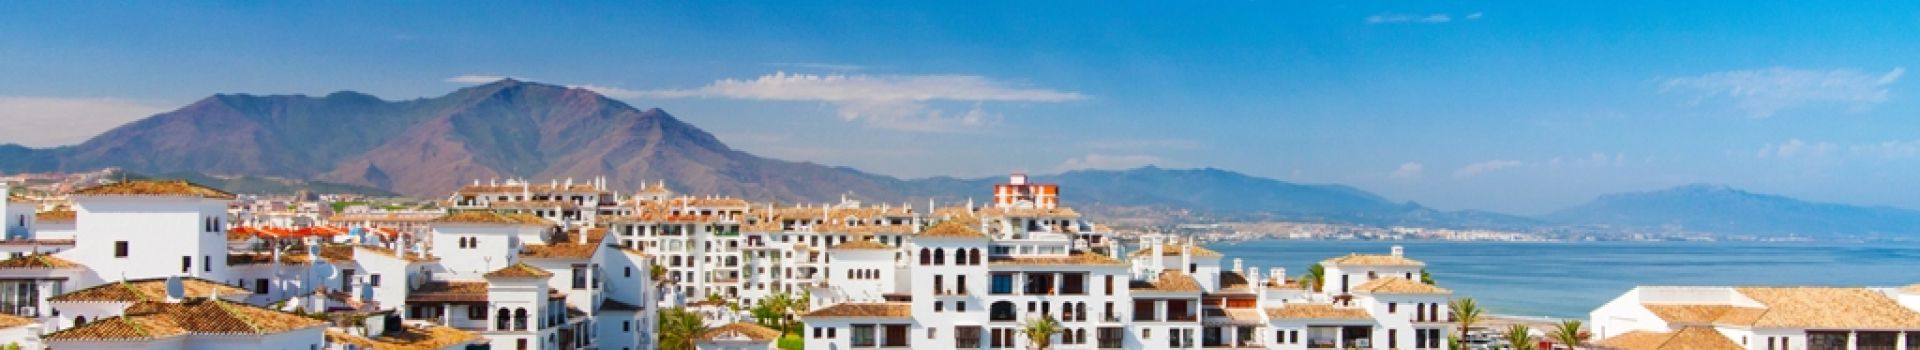 Winter Sun Holidays to Costa del Sol with Cassidy Travel